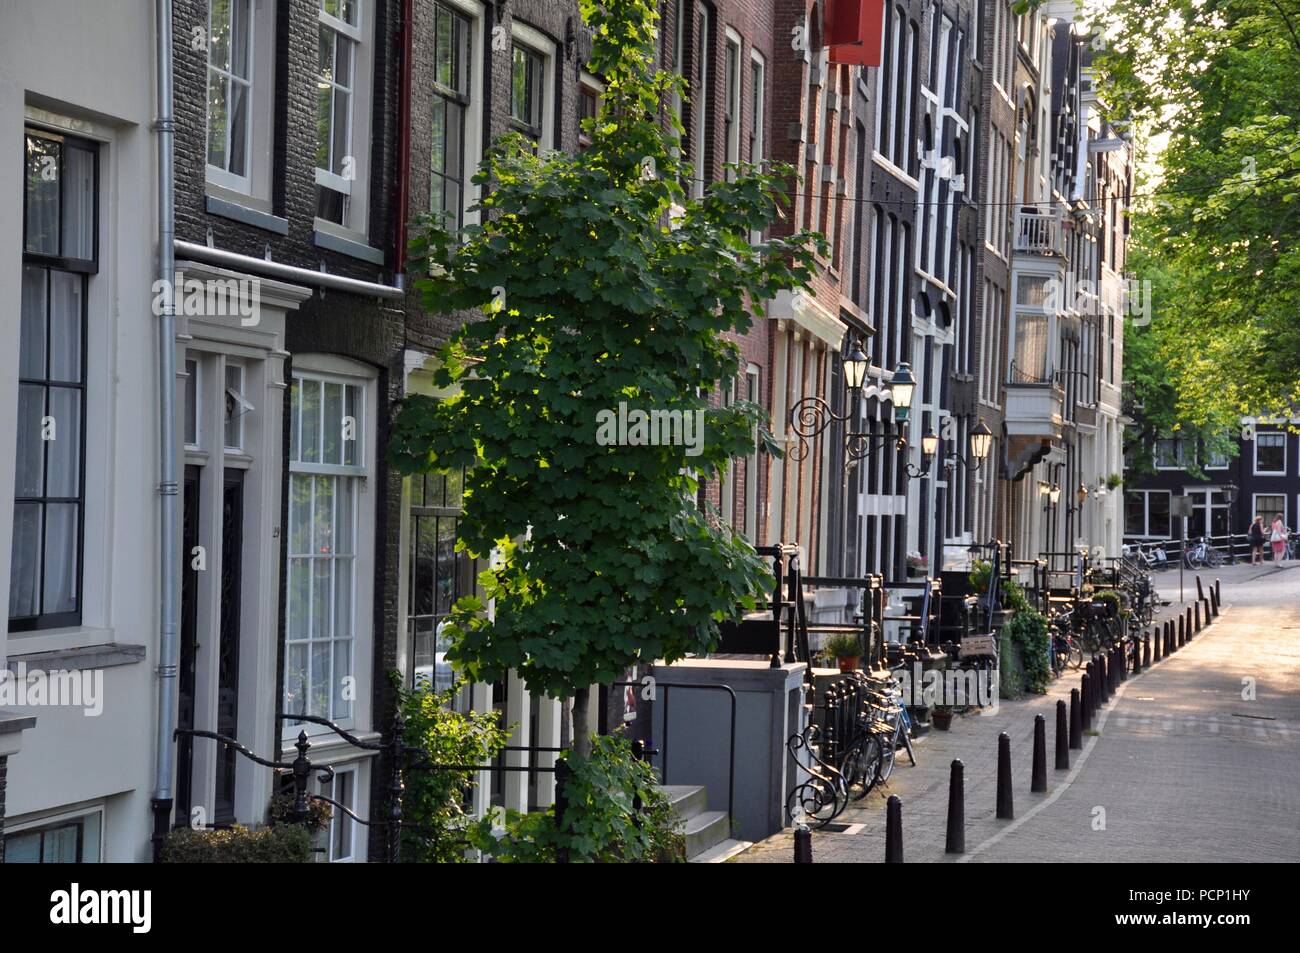 Row of houses in Amsterdam, Netherlands Stock Photo